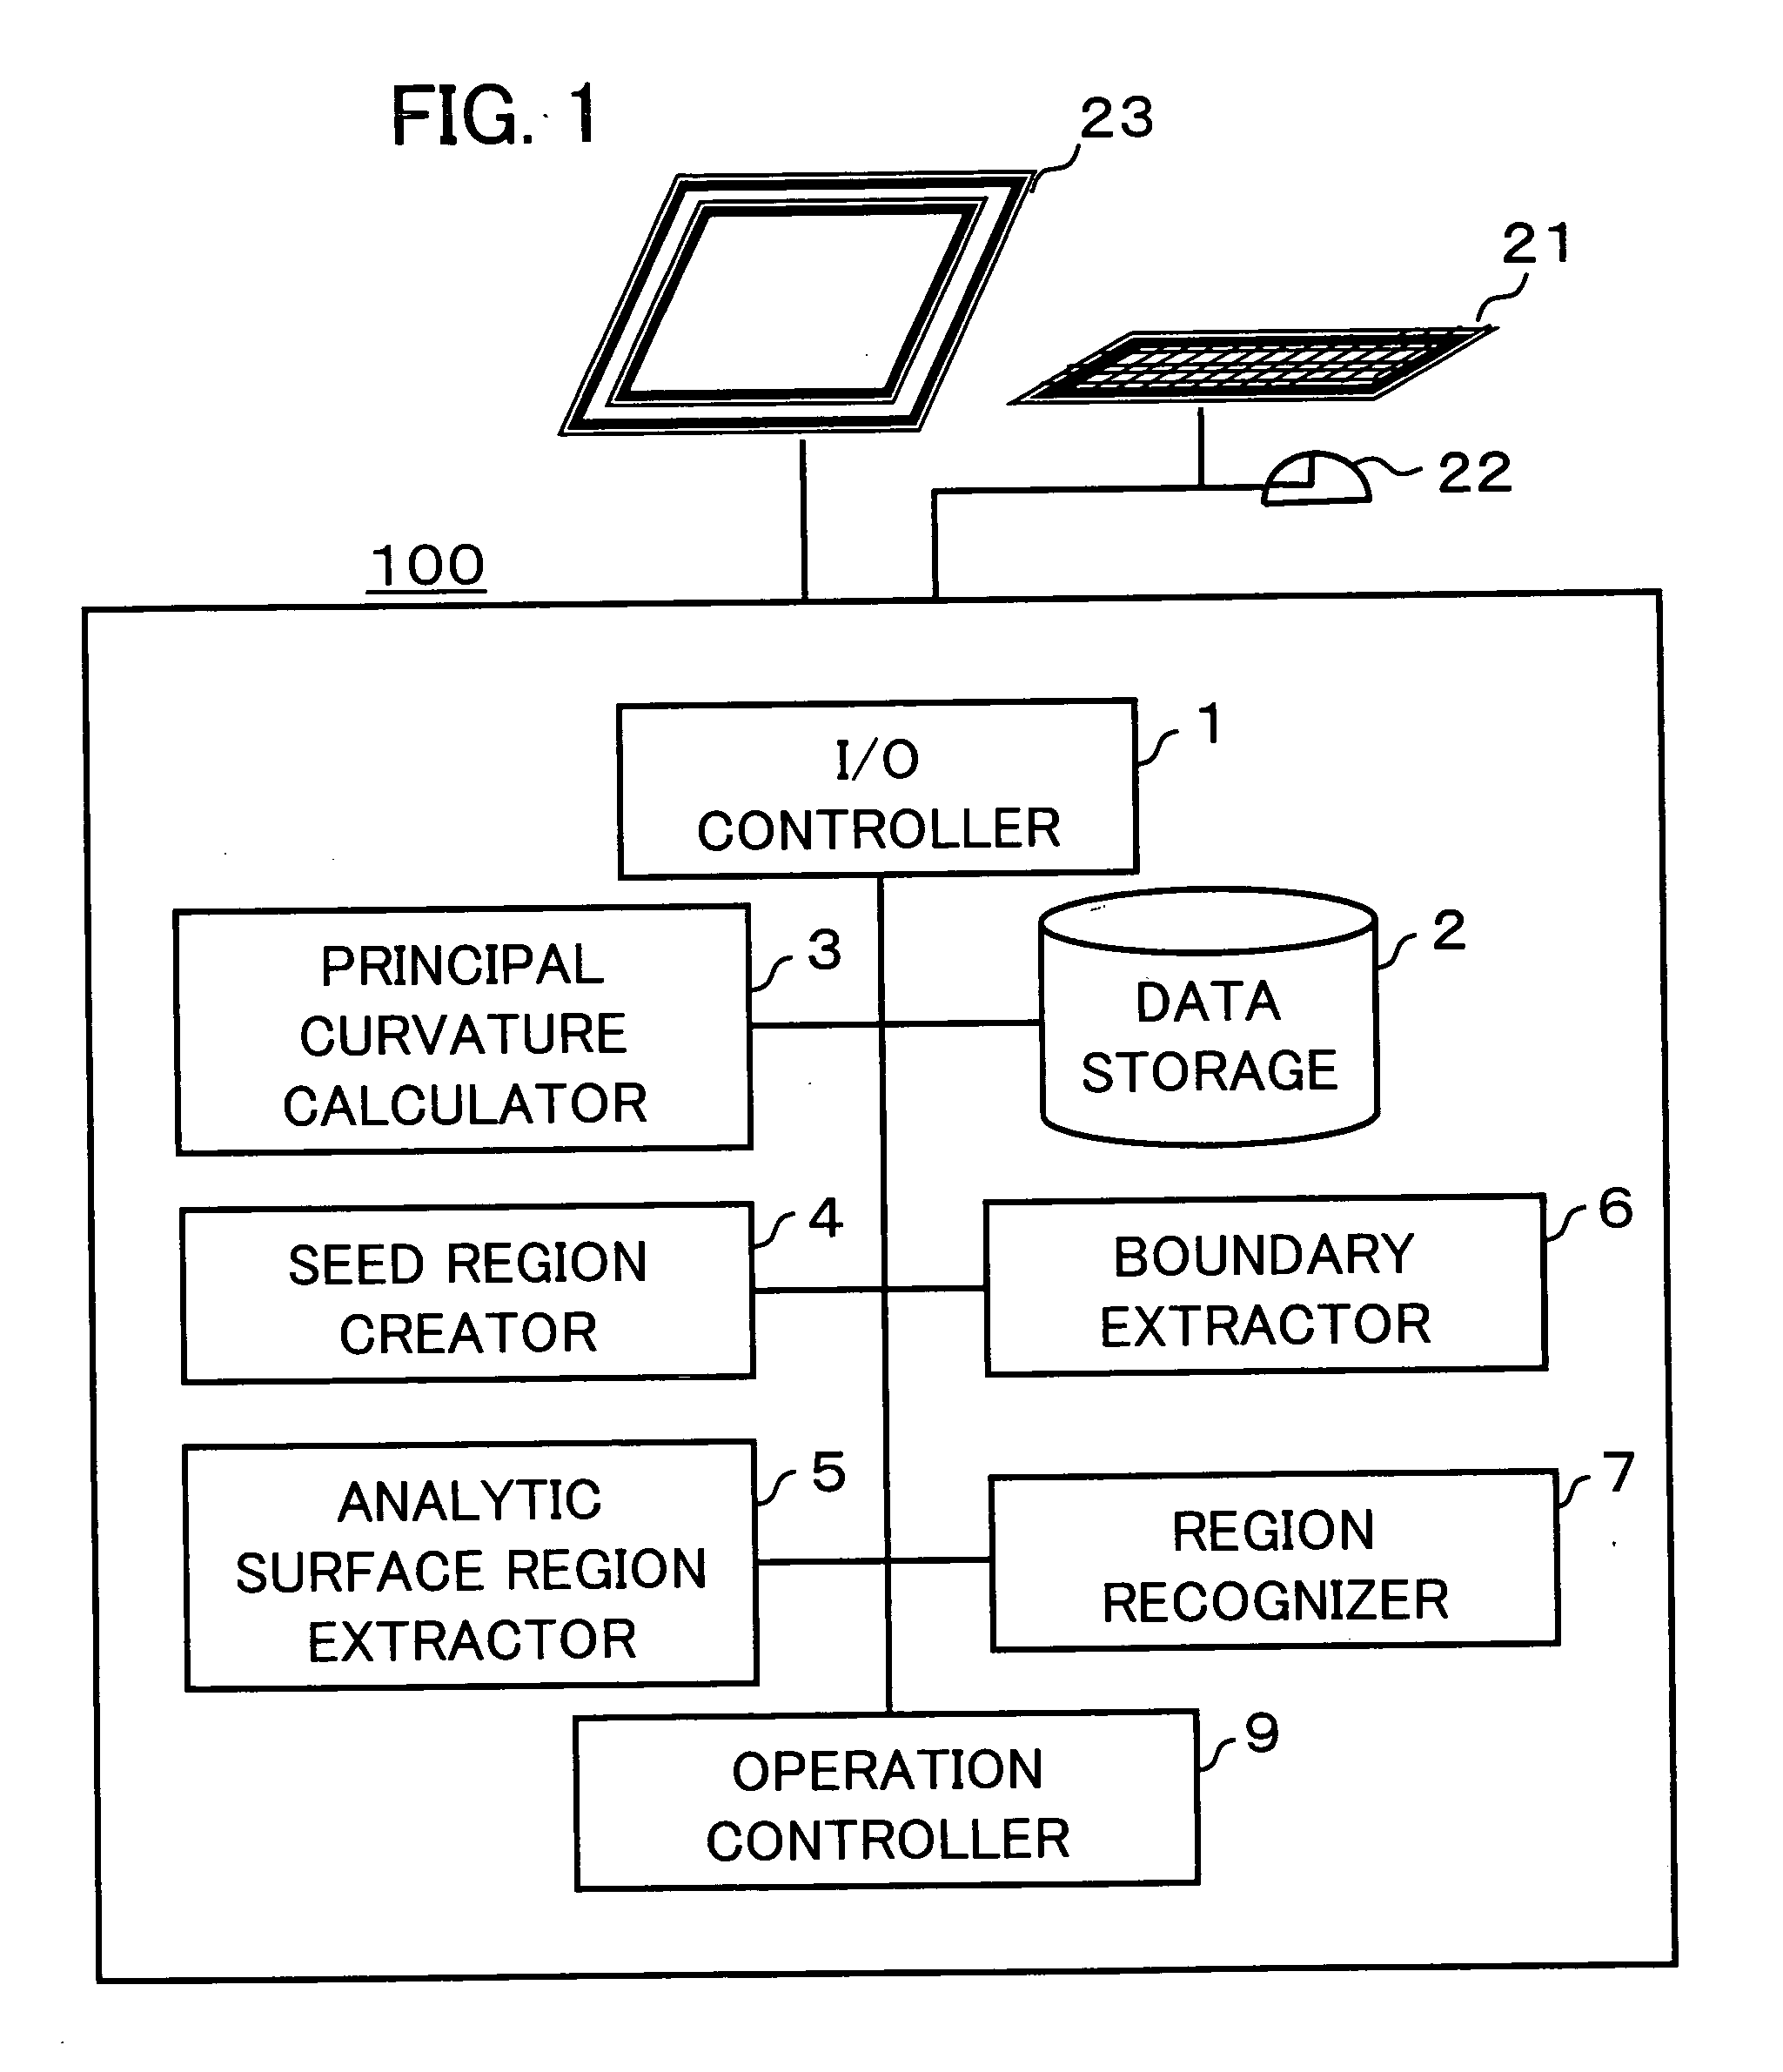 Apparatus, method and program for segmentation of mesh model data into analytic surfaces based on robust curvature estimation and region growing